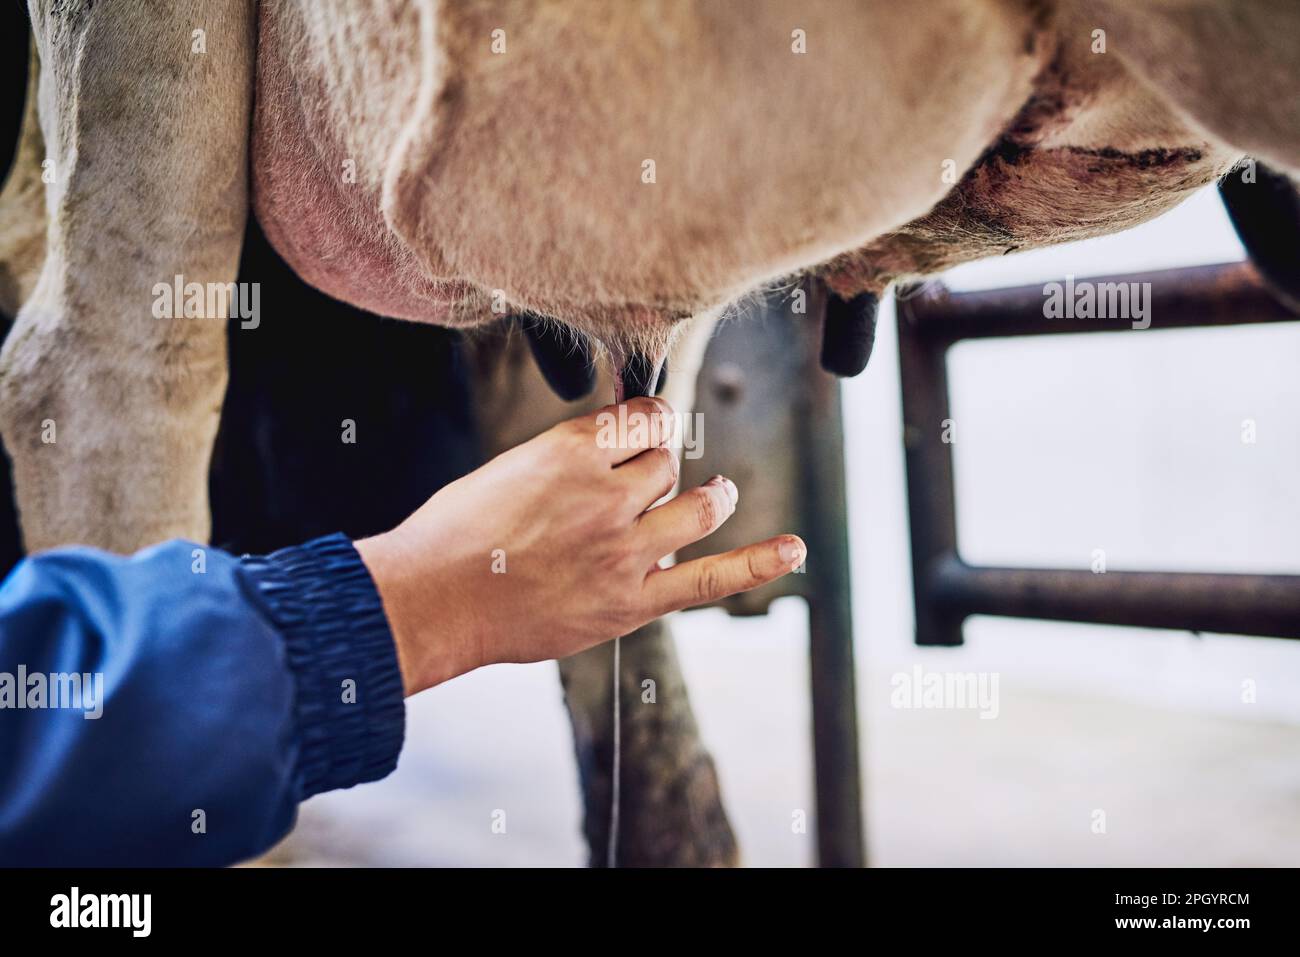 He prefers doing the milking by hand. an unrecognizable male farmer milking cows on a dairy farm. Stock Photo